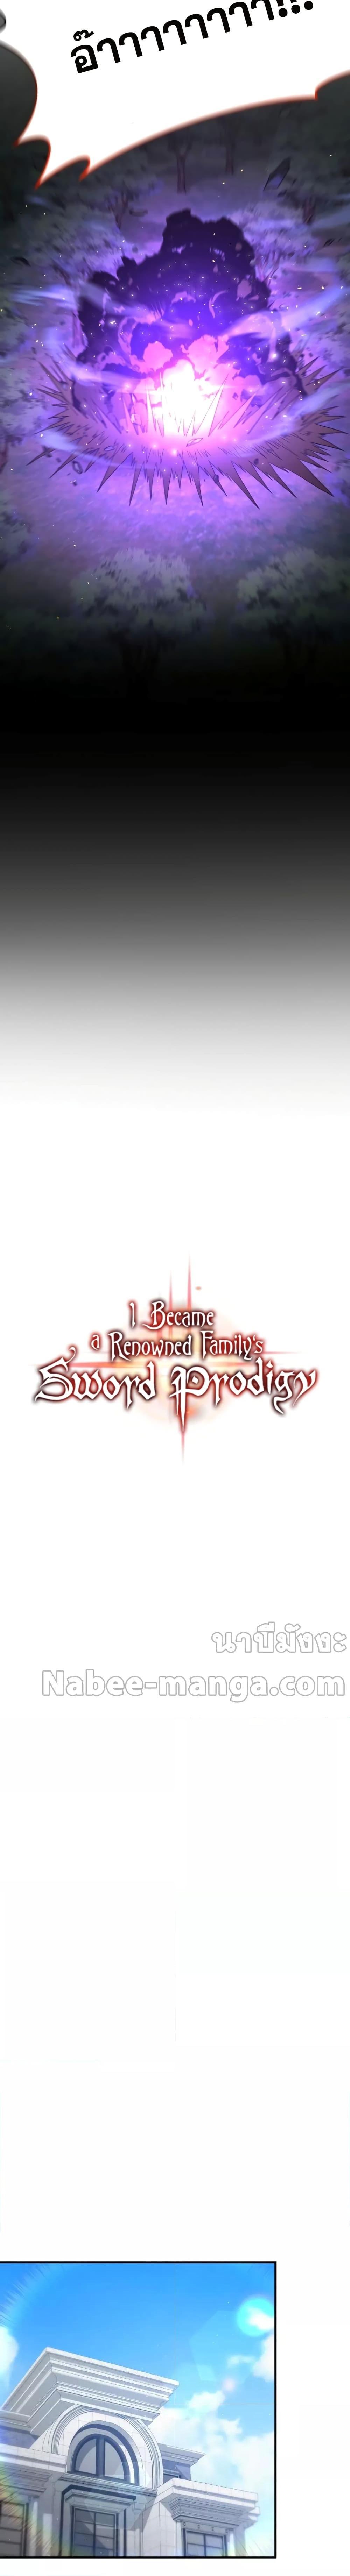 I Became a Renowned Family’s Sword Prodigy 74 17